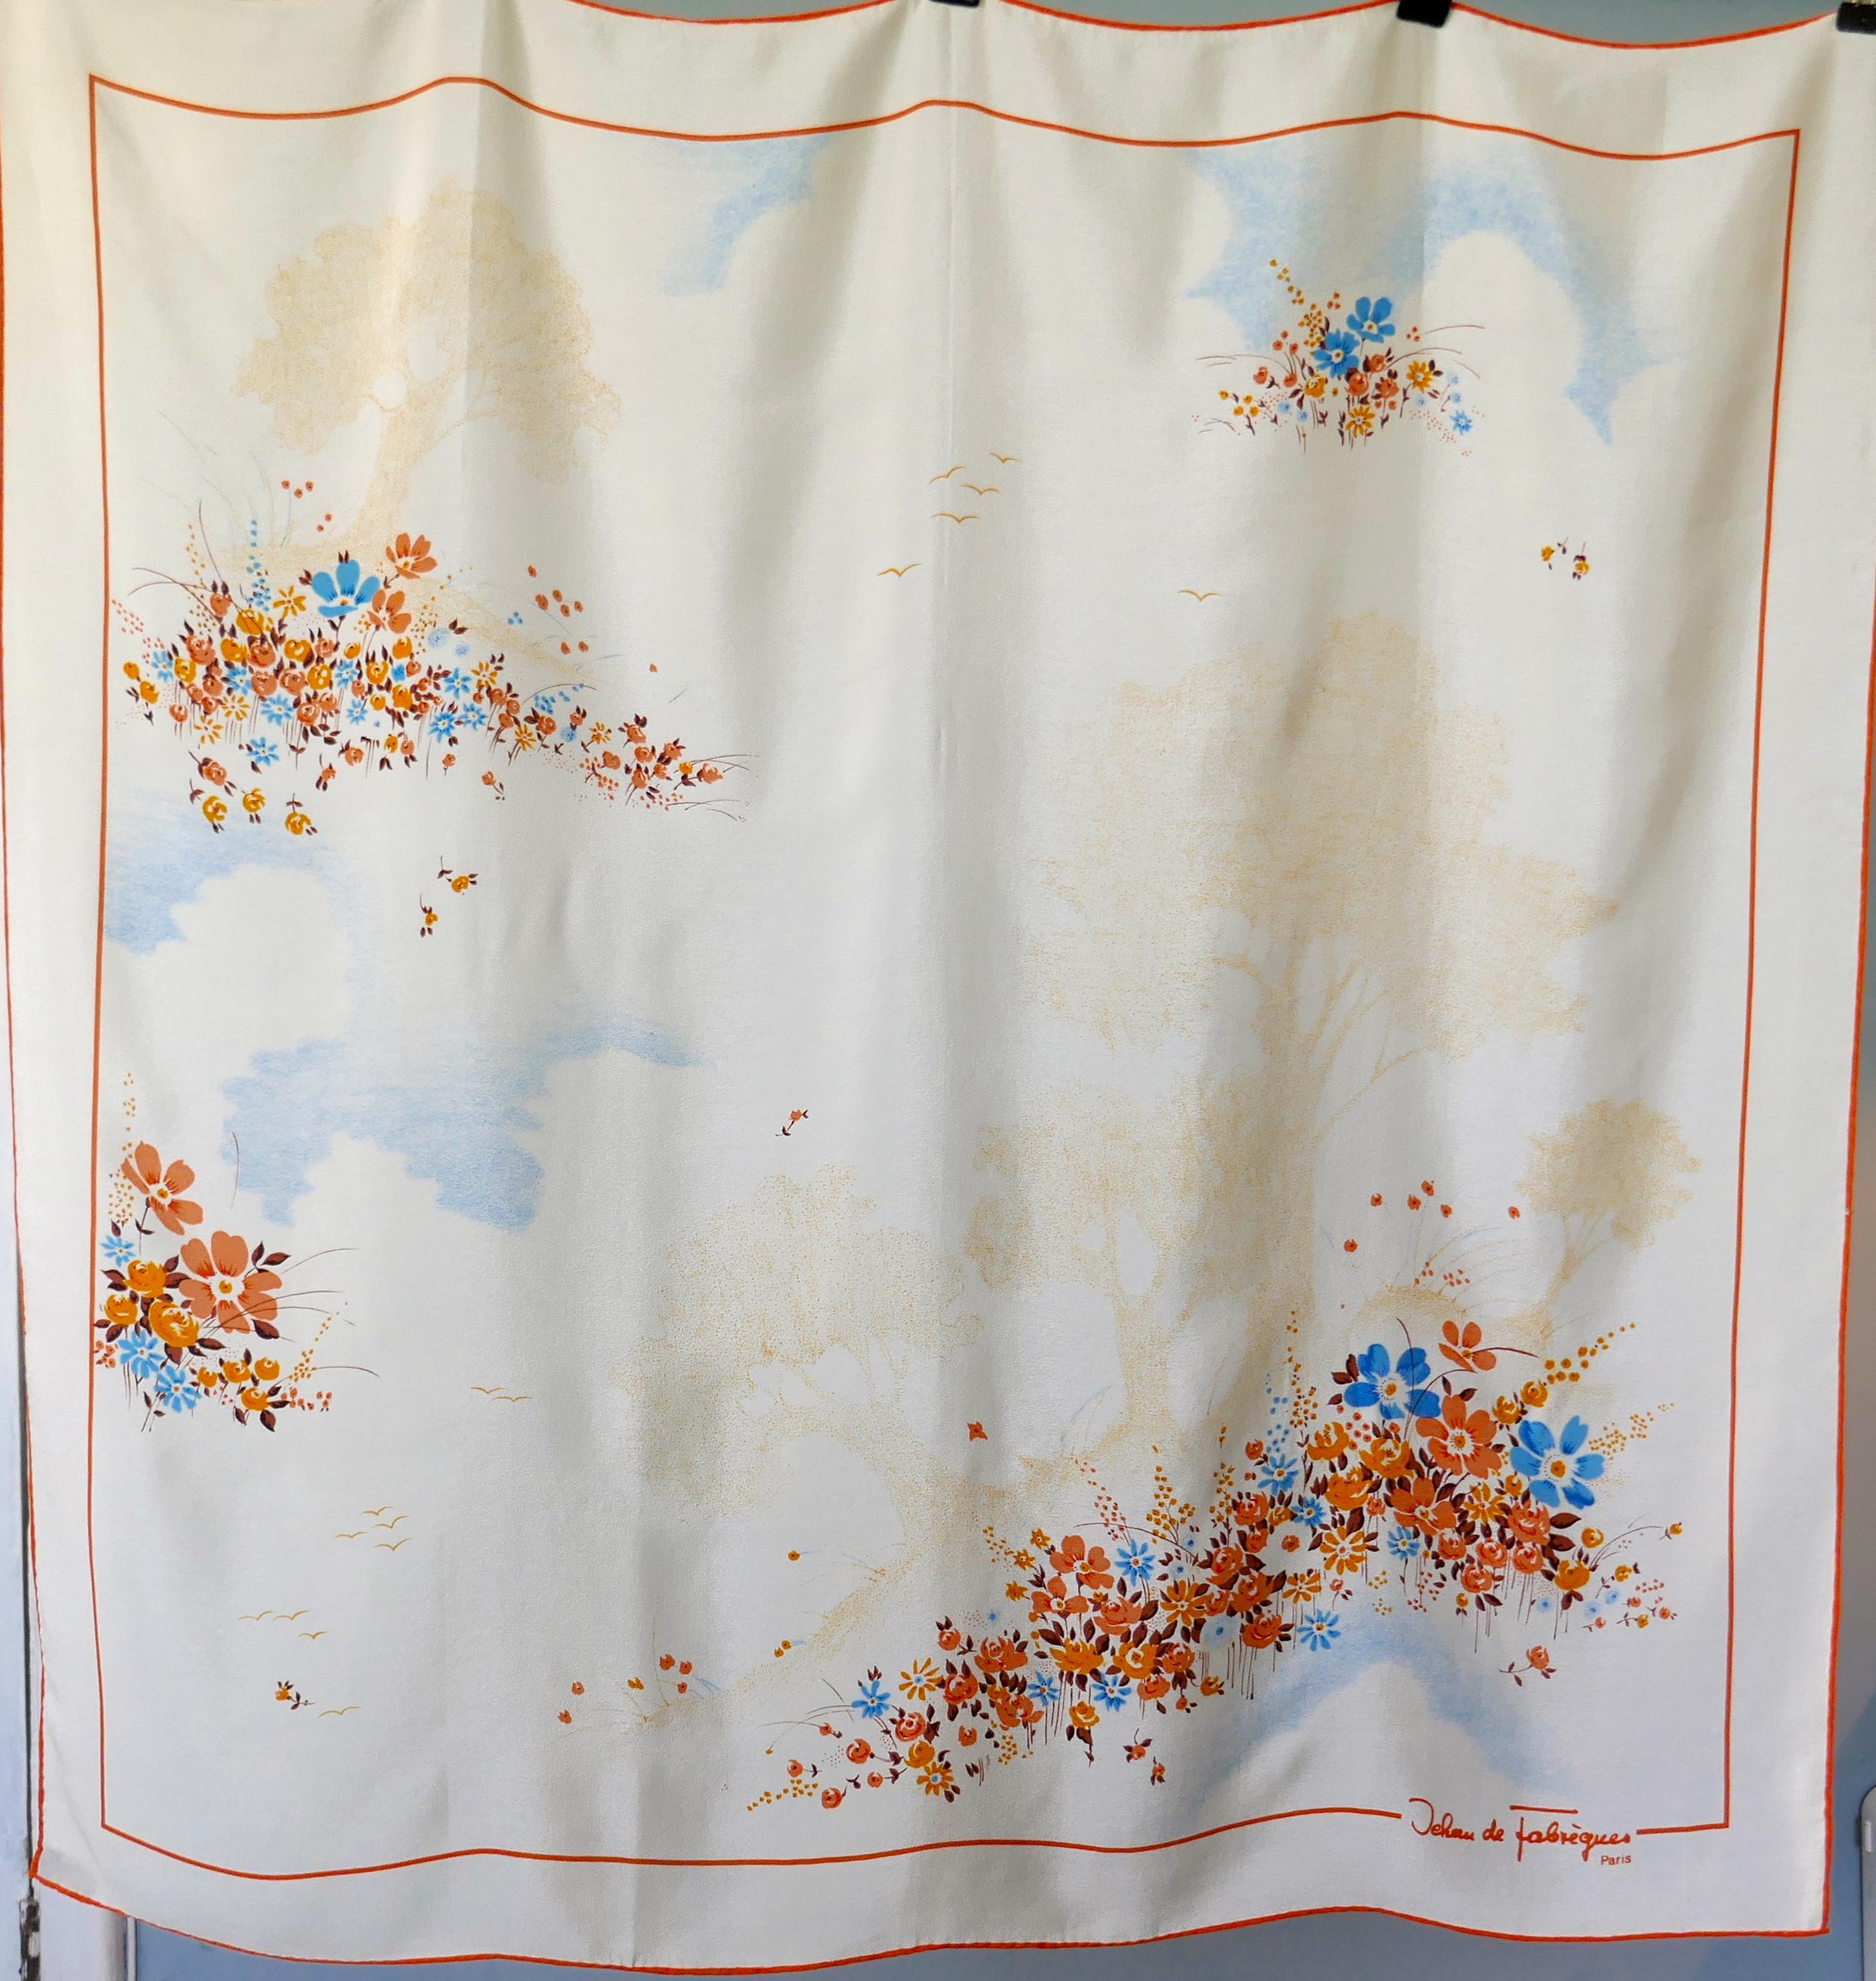 Wonderful 1980s Crêpe de Chine Scarf by Jean de Fabrèques Paris Jeanne Damas

A wonderful large scarf, floral with shaded sky and background on Team
The scarf is Unworn and safely stored away in a box and acid free paper 
It is as crisp as the day